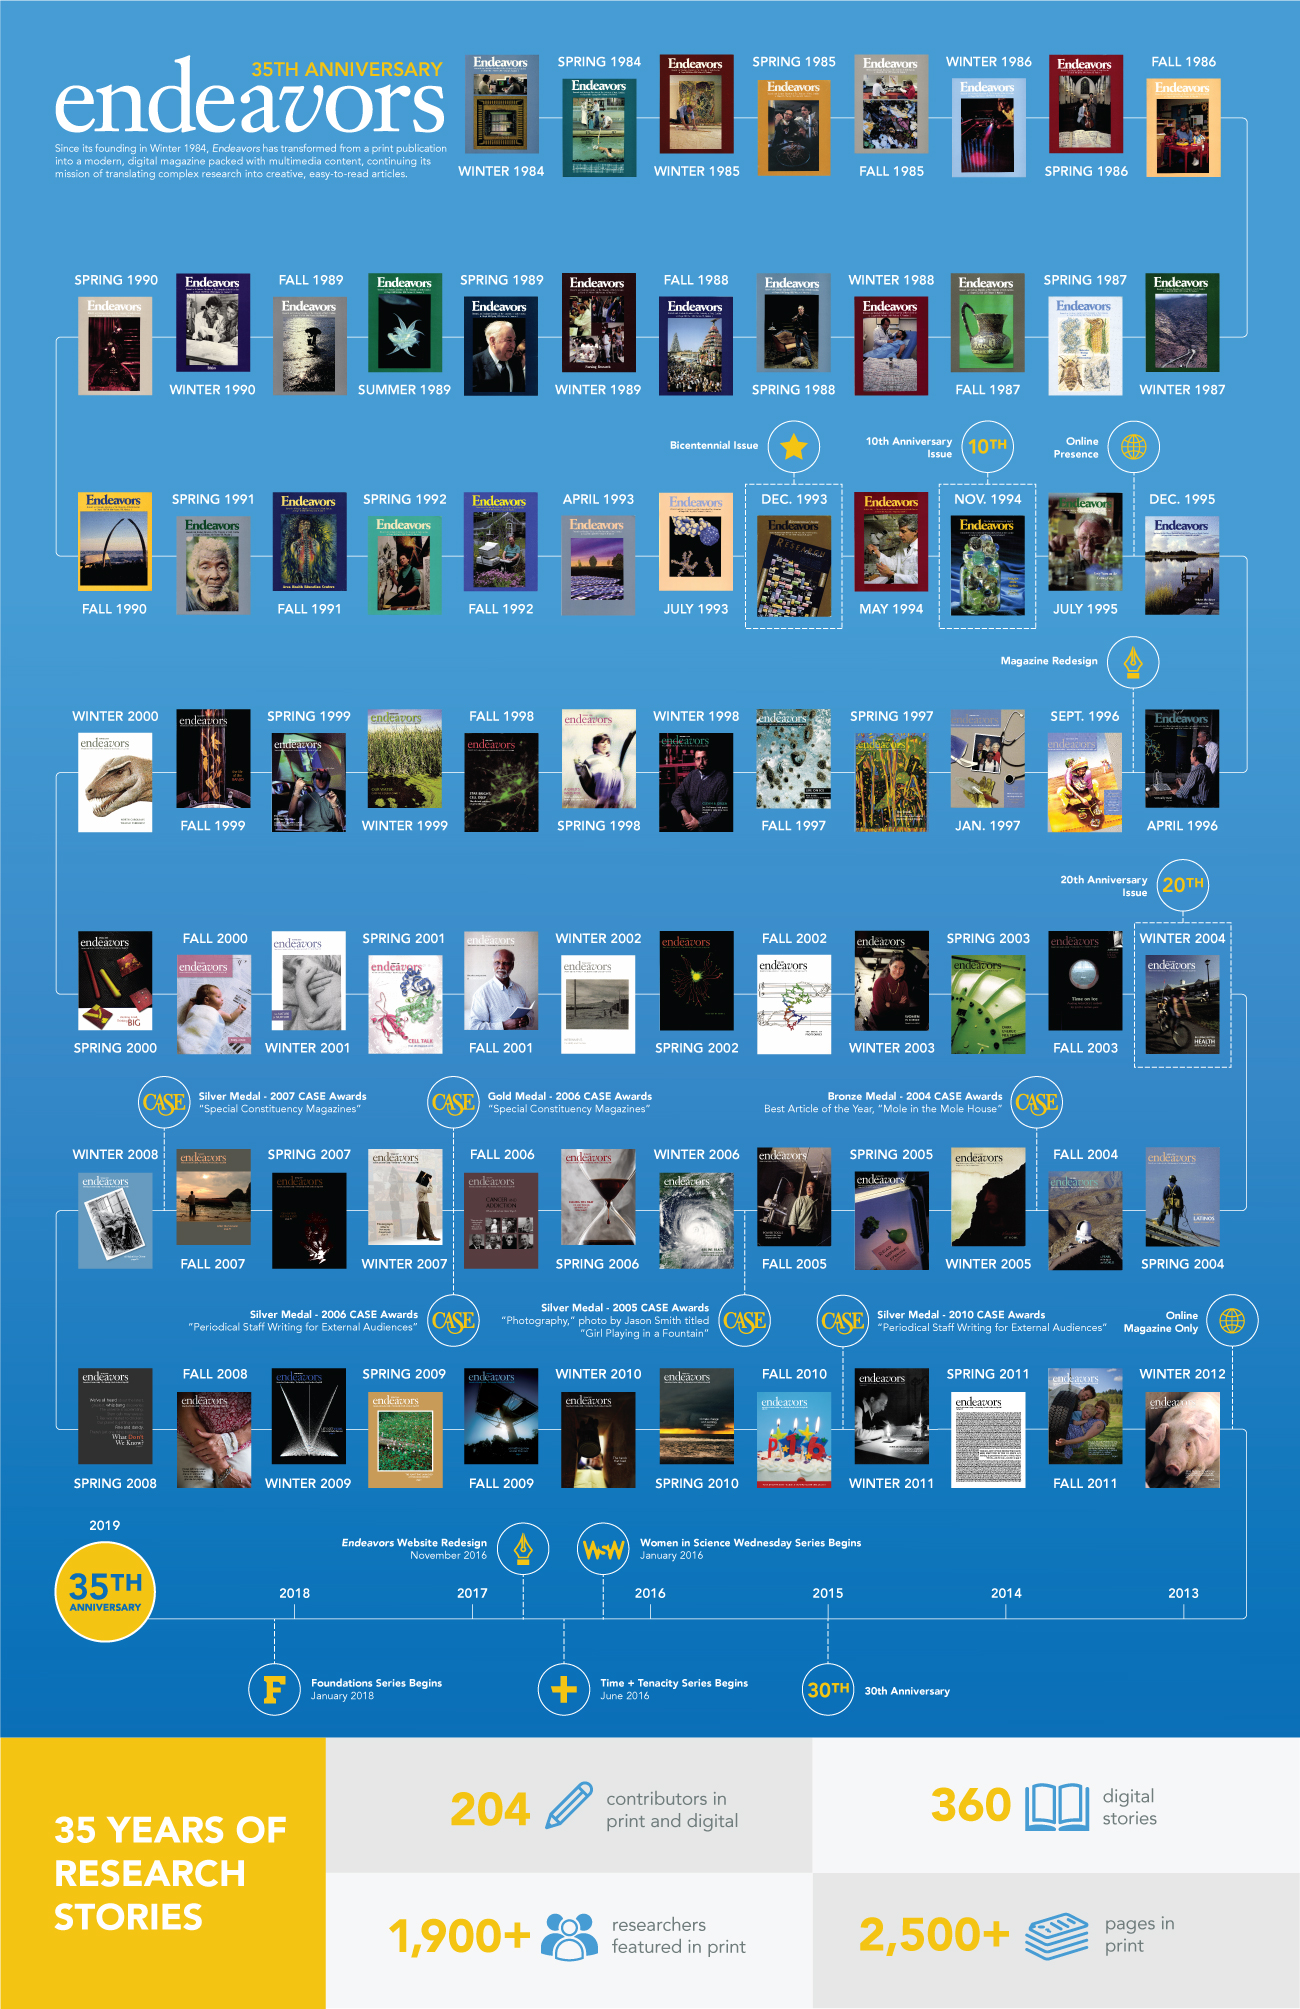 35th anniversary Endeavors Infographic. Since its founding in Winter 1984, Endeavors has transformed from a print publication into a modern, digital magazine packed with multimedia content, continuing its mission of translating complex research into creative, easy-to-read articles. All 80 covers present along with informational tags. December 1993 was the bicentennial issue. November 1994 was the 10th anniversary issue. Online presence after the July 1995 issue. Magazine redesign after the April 1996 issue. Winter 2004 was the 20th anniversary issue. Won a bronze medal CASE award in 2004 for “Best Article of the Year” for “Mole in the Mole House.” Won a silver medal CASE award in 2005 for “Photography” with a photo by Jason Smith titled “Girl Playing in a Fountain.” Won a gold medal CASE award in 2006 for “Special Constituency Magazines.” Won a silver medal CASE award in 2006 for “Periodical Staff Writing for External Audiences.” Won silver medal CASE award in 2007 for “Special Constituency Magazines.” Won silver medal CASE award n 2010 for “Periodical Staff Writing for External Audiences.” Winter 2012 issue was the last issue, magazine went to be an online only magazine. Celebrated 30th anniversary in 2015. Released the “Women in Science Wednesday” Series in January 2016. Released the “Time & Tenacity” Series in June 2016. Endeavors website redesign went live in November 2016. Released the “Foundations” Series in January 2018. Celebrated the 35th anniversary in 2019. 35 Years of Research Stories: 204 contributors in print and digital. 360 digital stories. Over 1,900 researchers featured in print. Over 2,500 pages in print. 